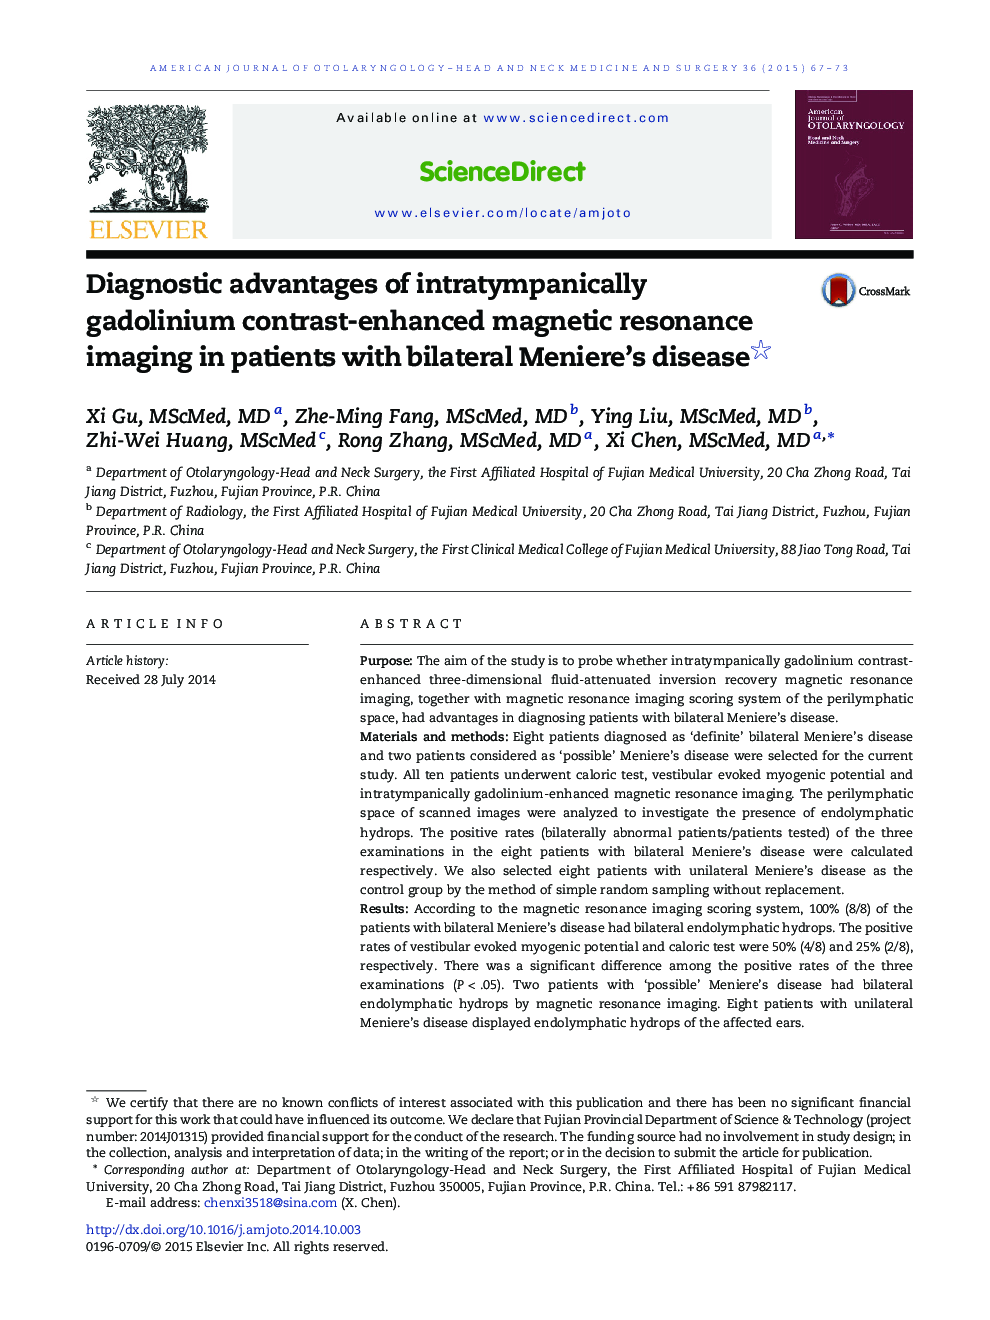 Diagnostic advantages of intratympanically gadolinium contrast-enhanced magnetic resonance imaging in patients with bilateral Meniere's disease 